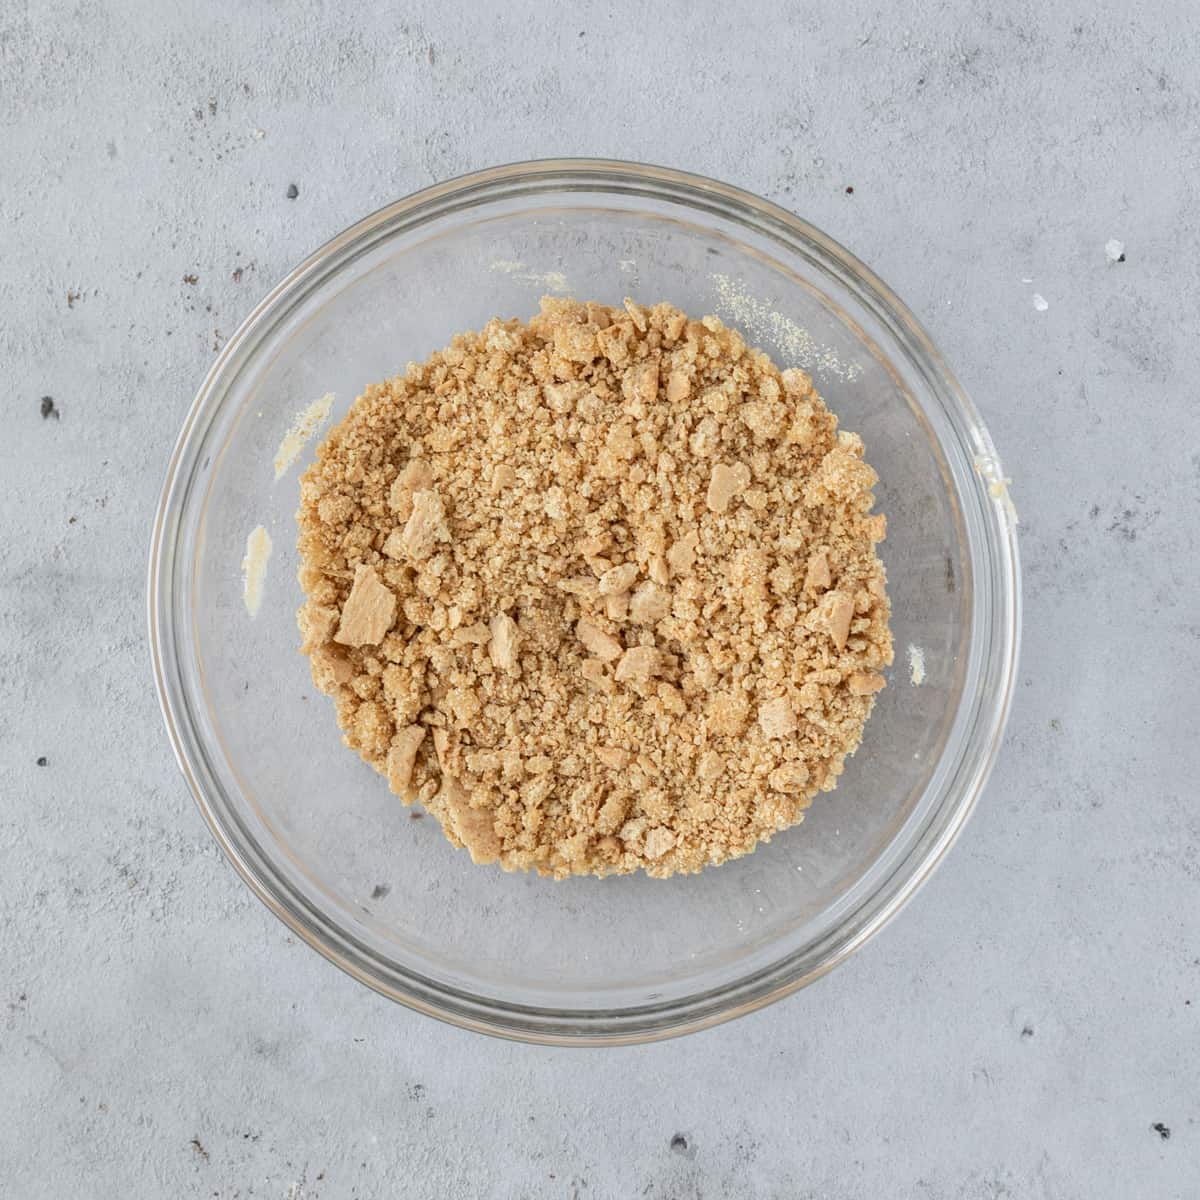 the graham cracker crust in a glass bowl on a grey background.